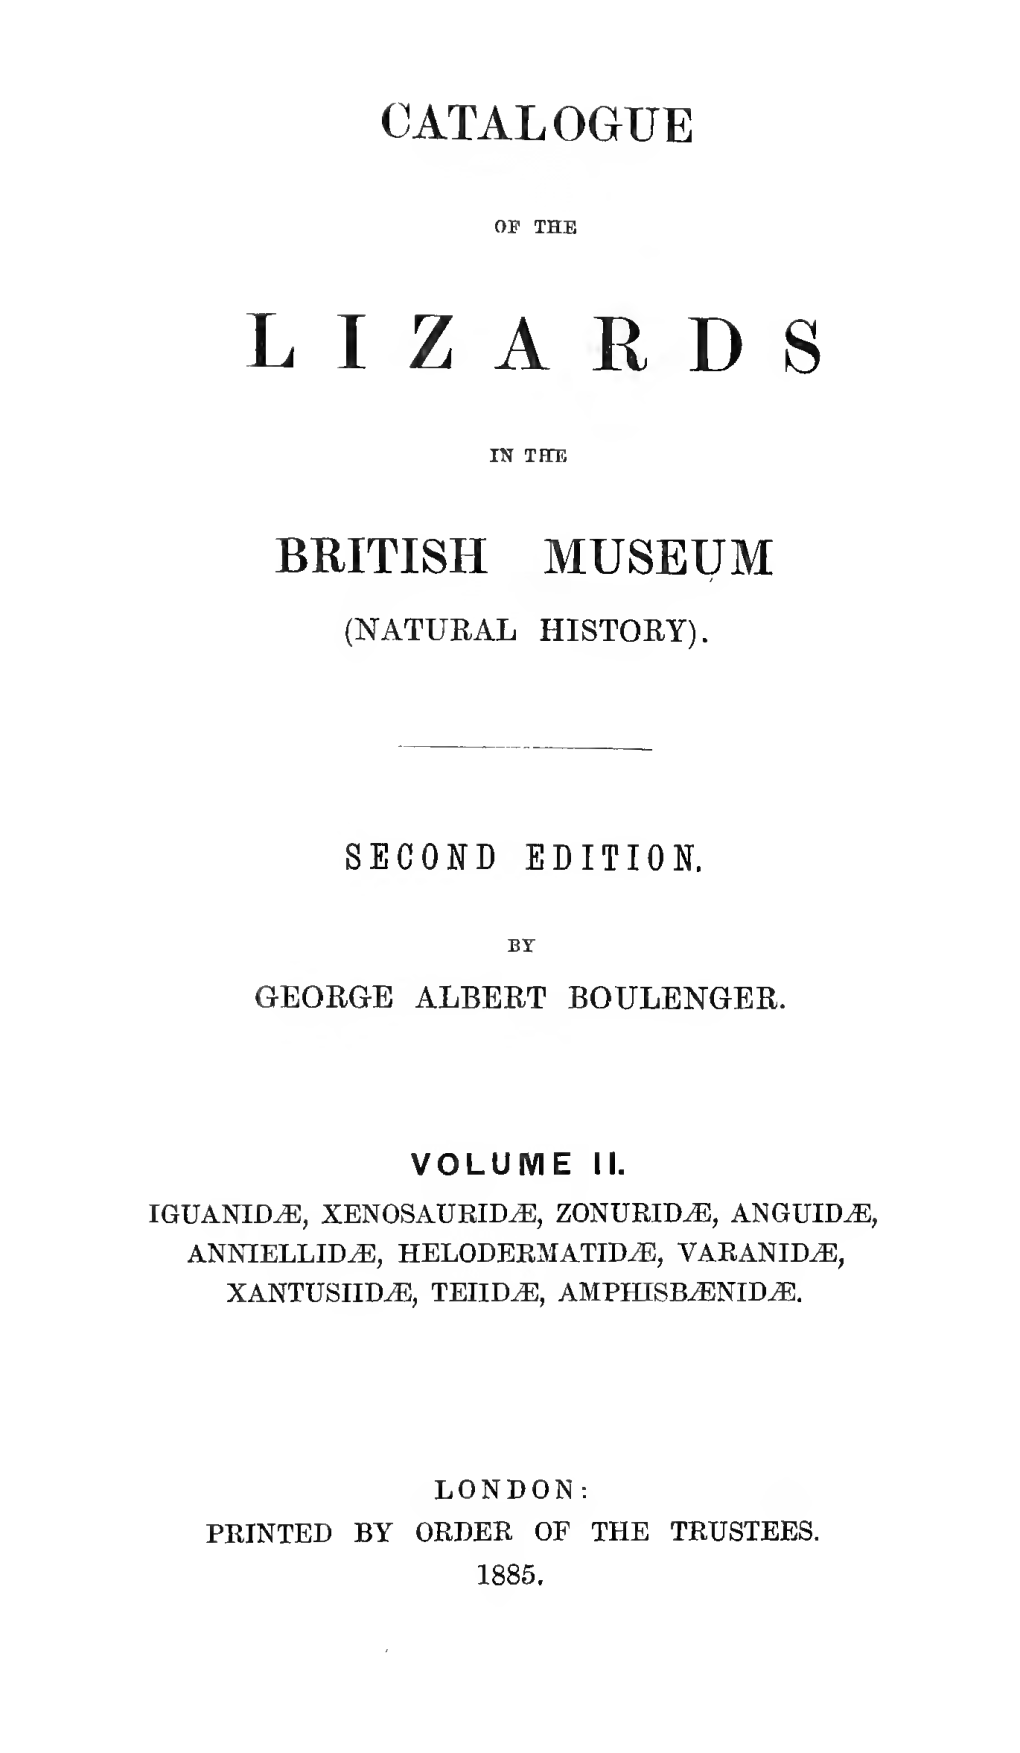 Catalogue of the Lizards in the British Museum